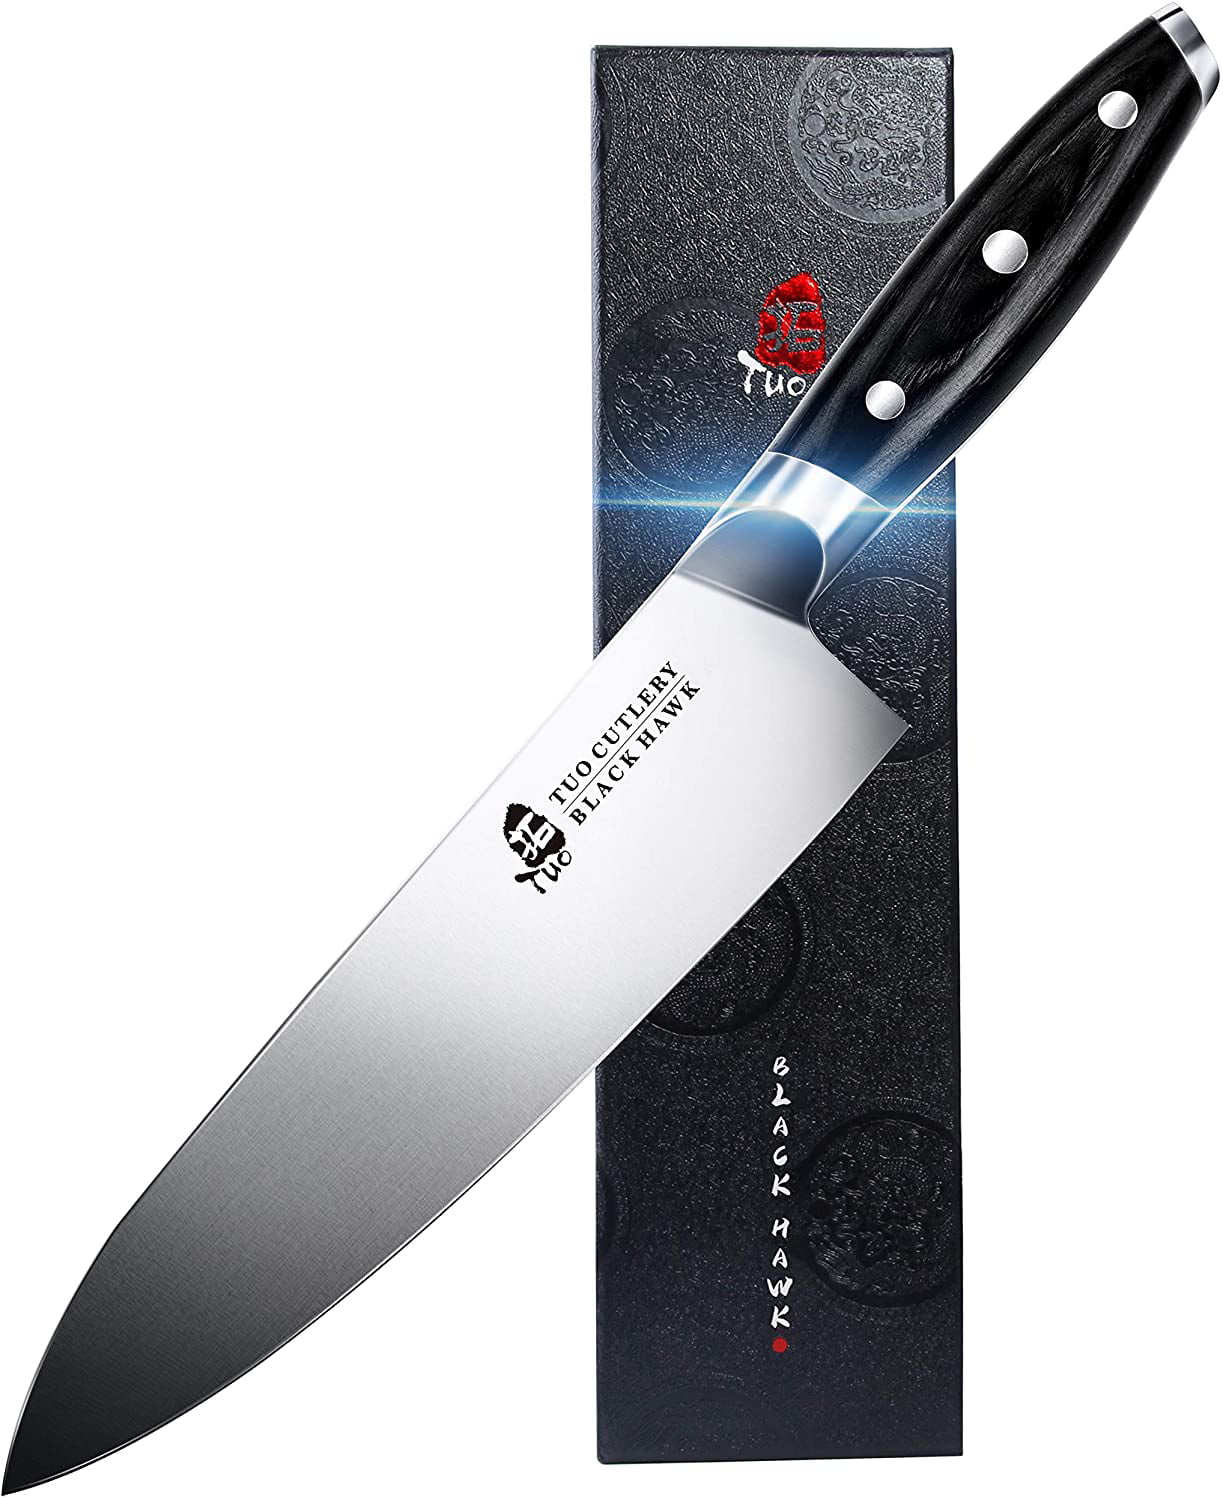 Punktlighed springe Inde TUO Chef Knife - 8 inch Kitchen Chefs Knives Professional Cooking Knife -  German HC Steel - Full Tang Pakkawood Handle - BLACK HAWK SERIES with Gift  Box - Walmart.com